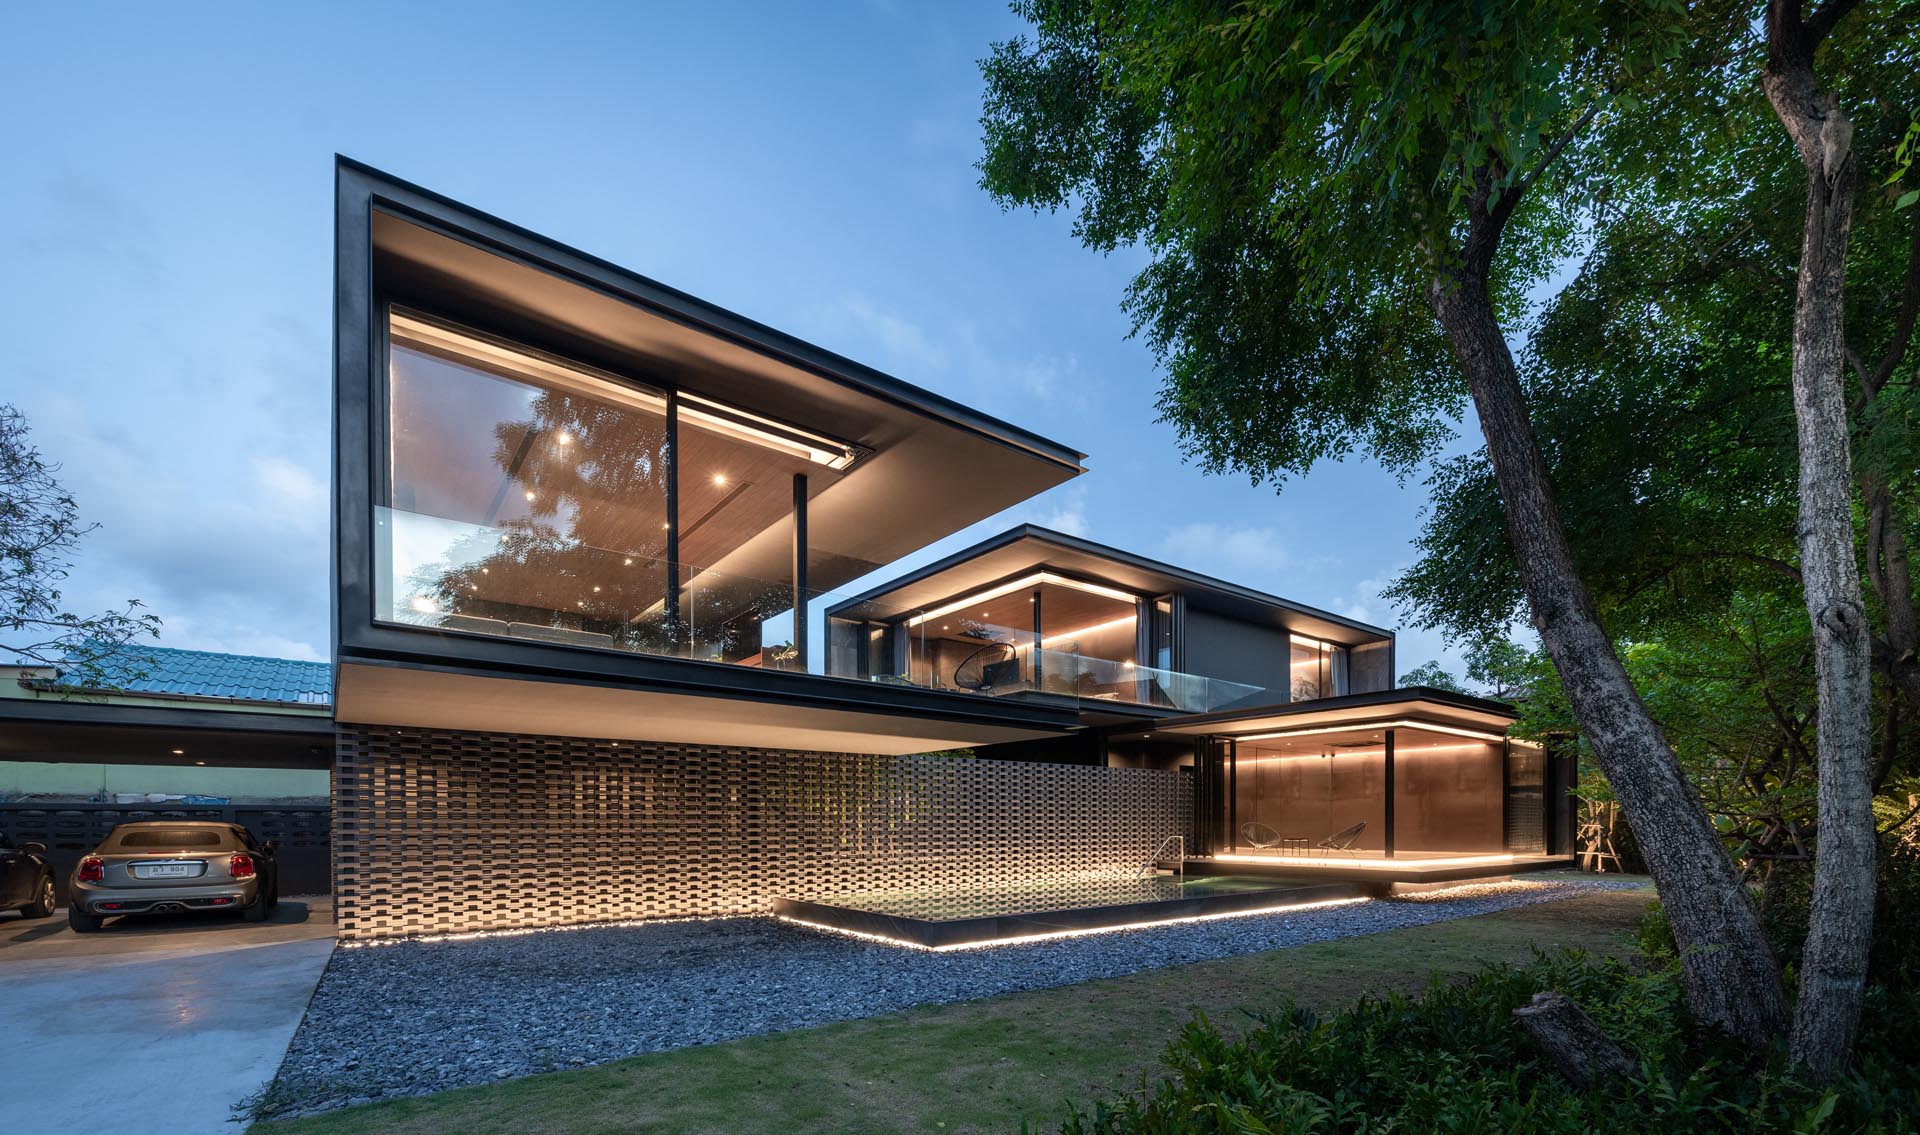 motor Glimte Snavs Lighting Is An Important Design Feature On This Modern House